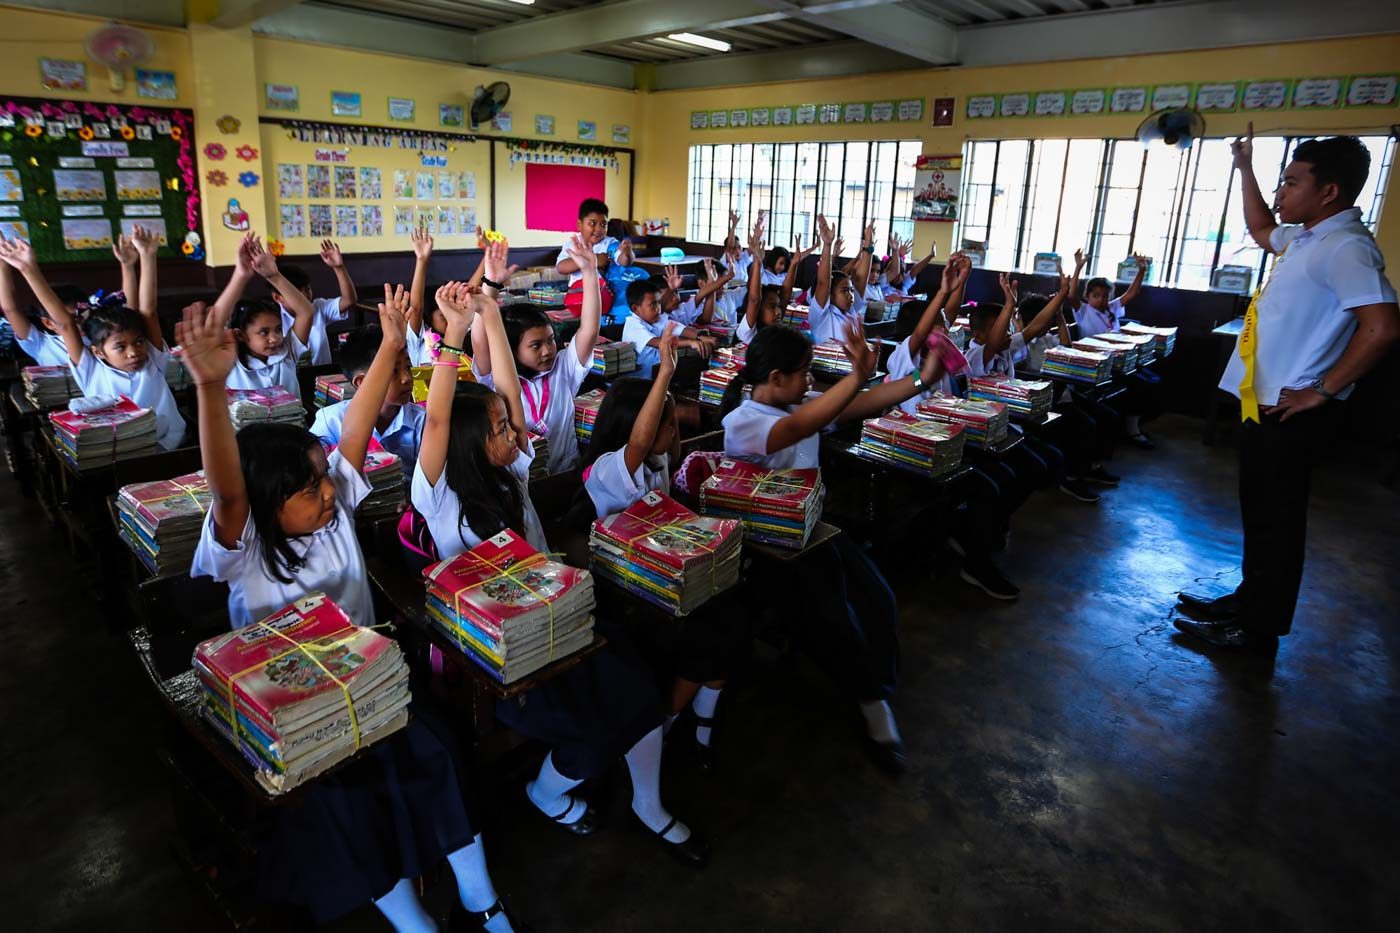 Recto proposes new job ranks with higher pay for teachers